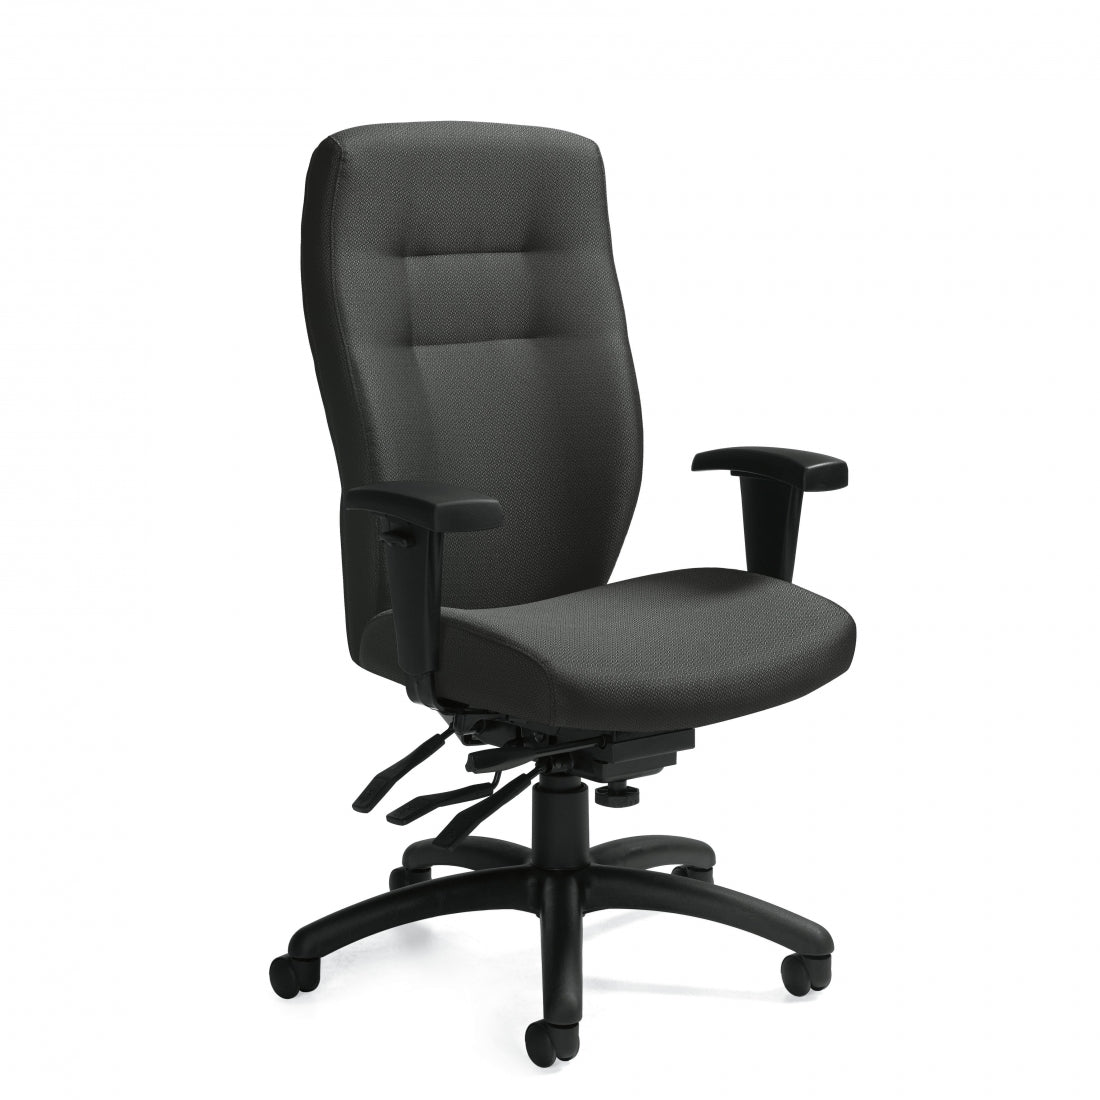 Customized Conference Tilter Chair G5080-0/-3/5081-0/-3/5090-4/5091-4 - Kainosbuy.com